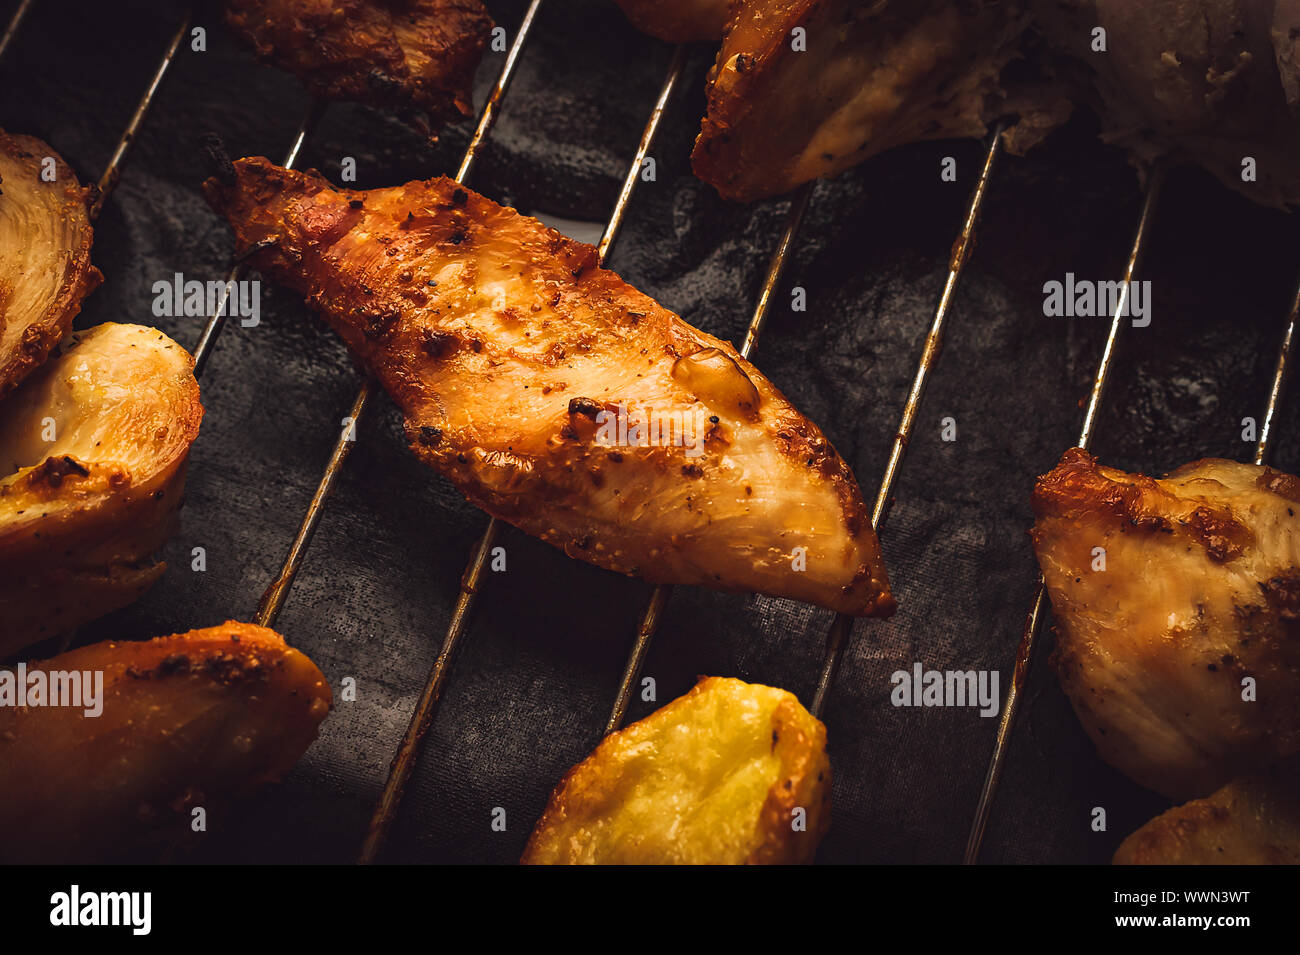 Roasted Chicken Slices and Potatoes on Stainless Steel Cooking Grid. Grilled Chicken Breast with Slices Made for Marinade to Penetrate the Meat Better Stock Photo